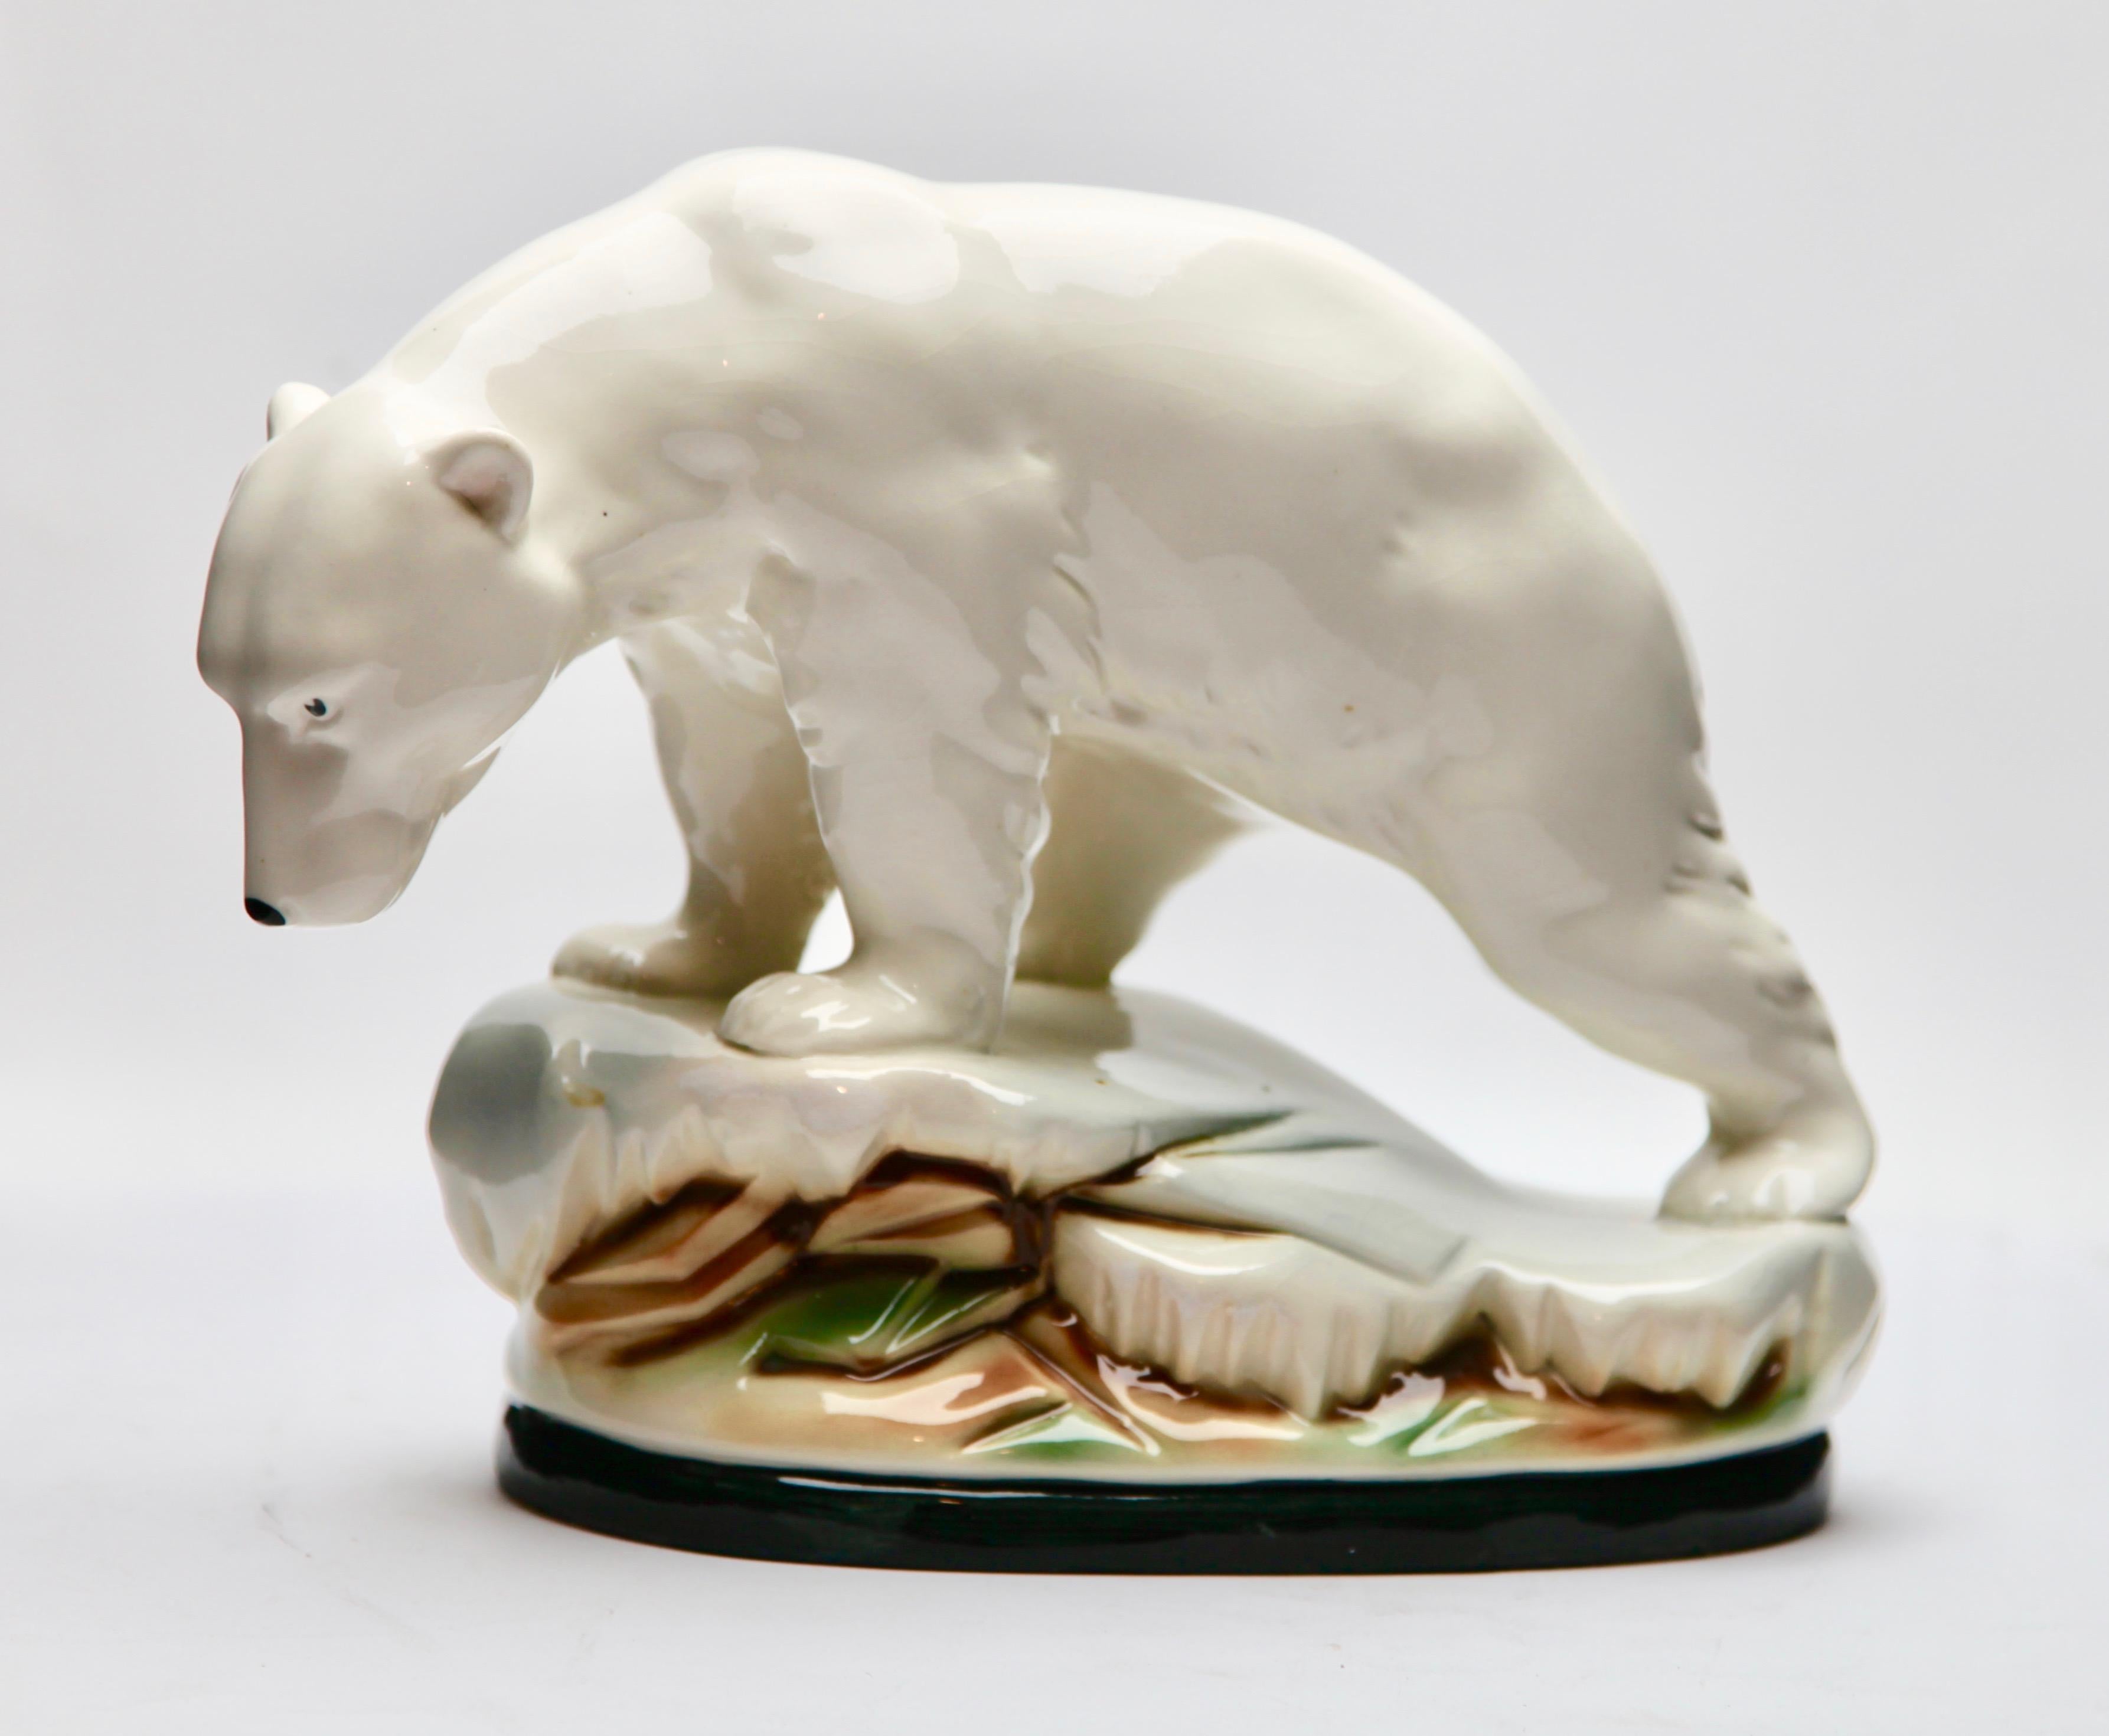 Hand-Crafted Polar Bear Figurine in White Glazed Porcelain, Hand Painted Detail, 1920s